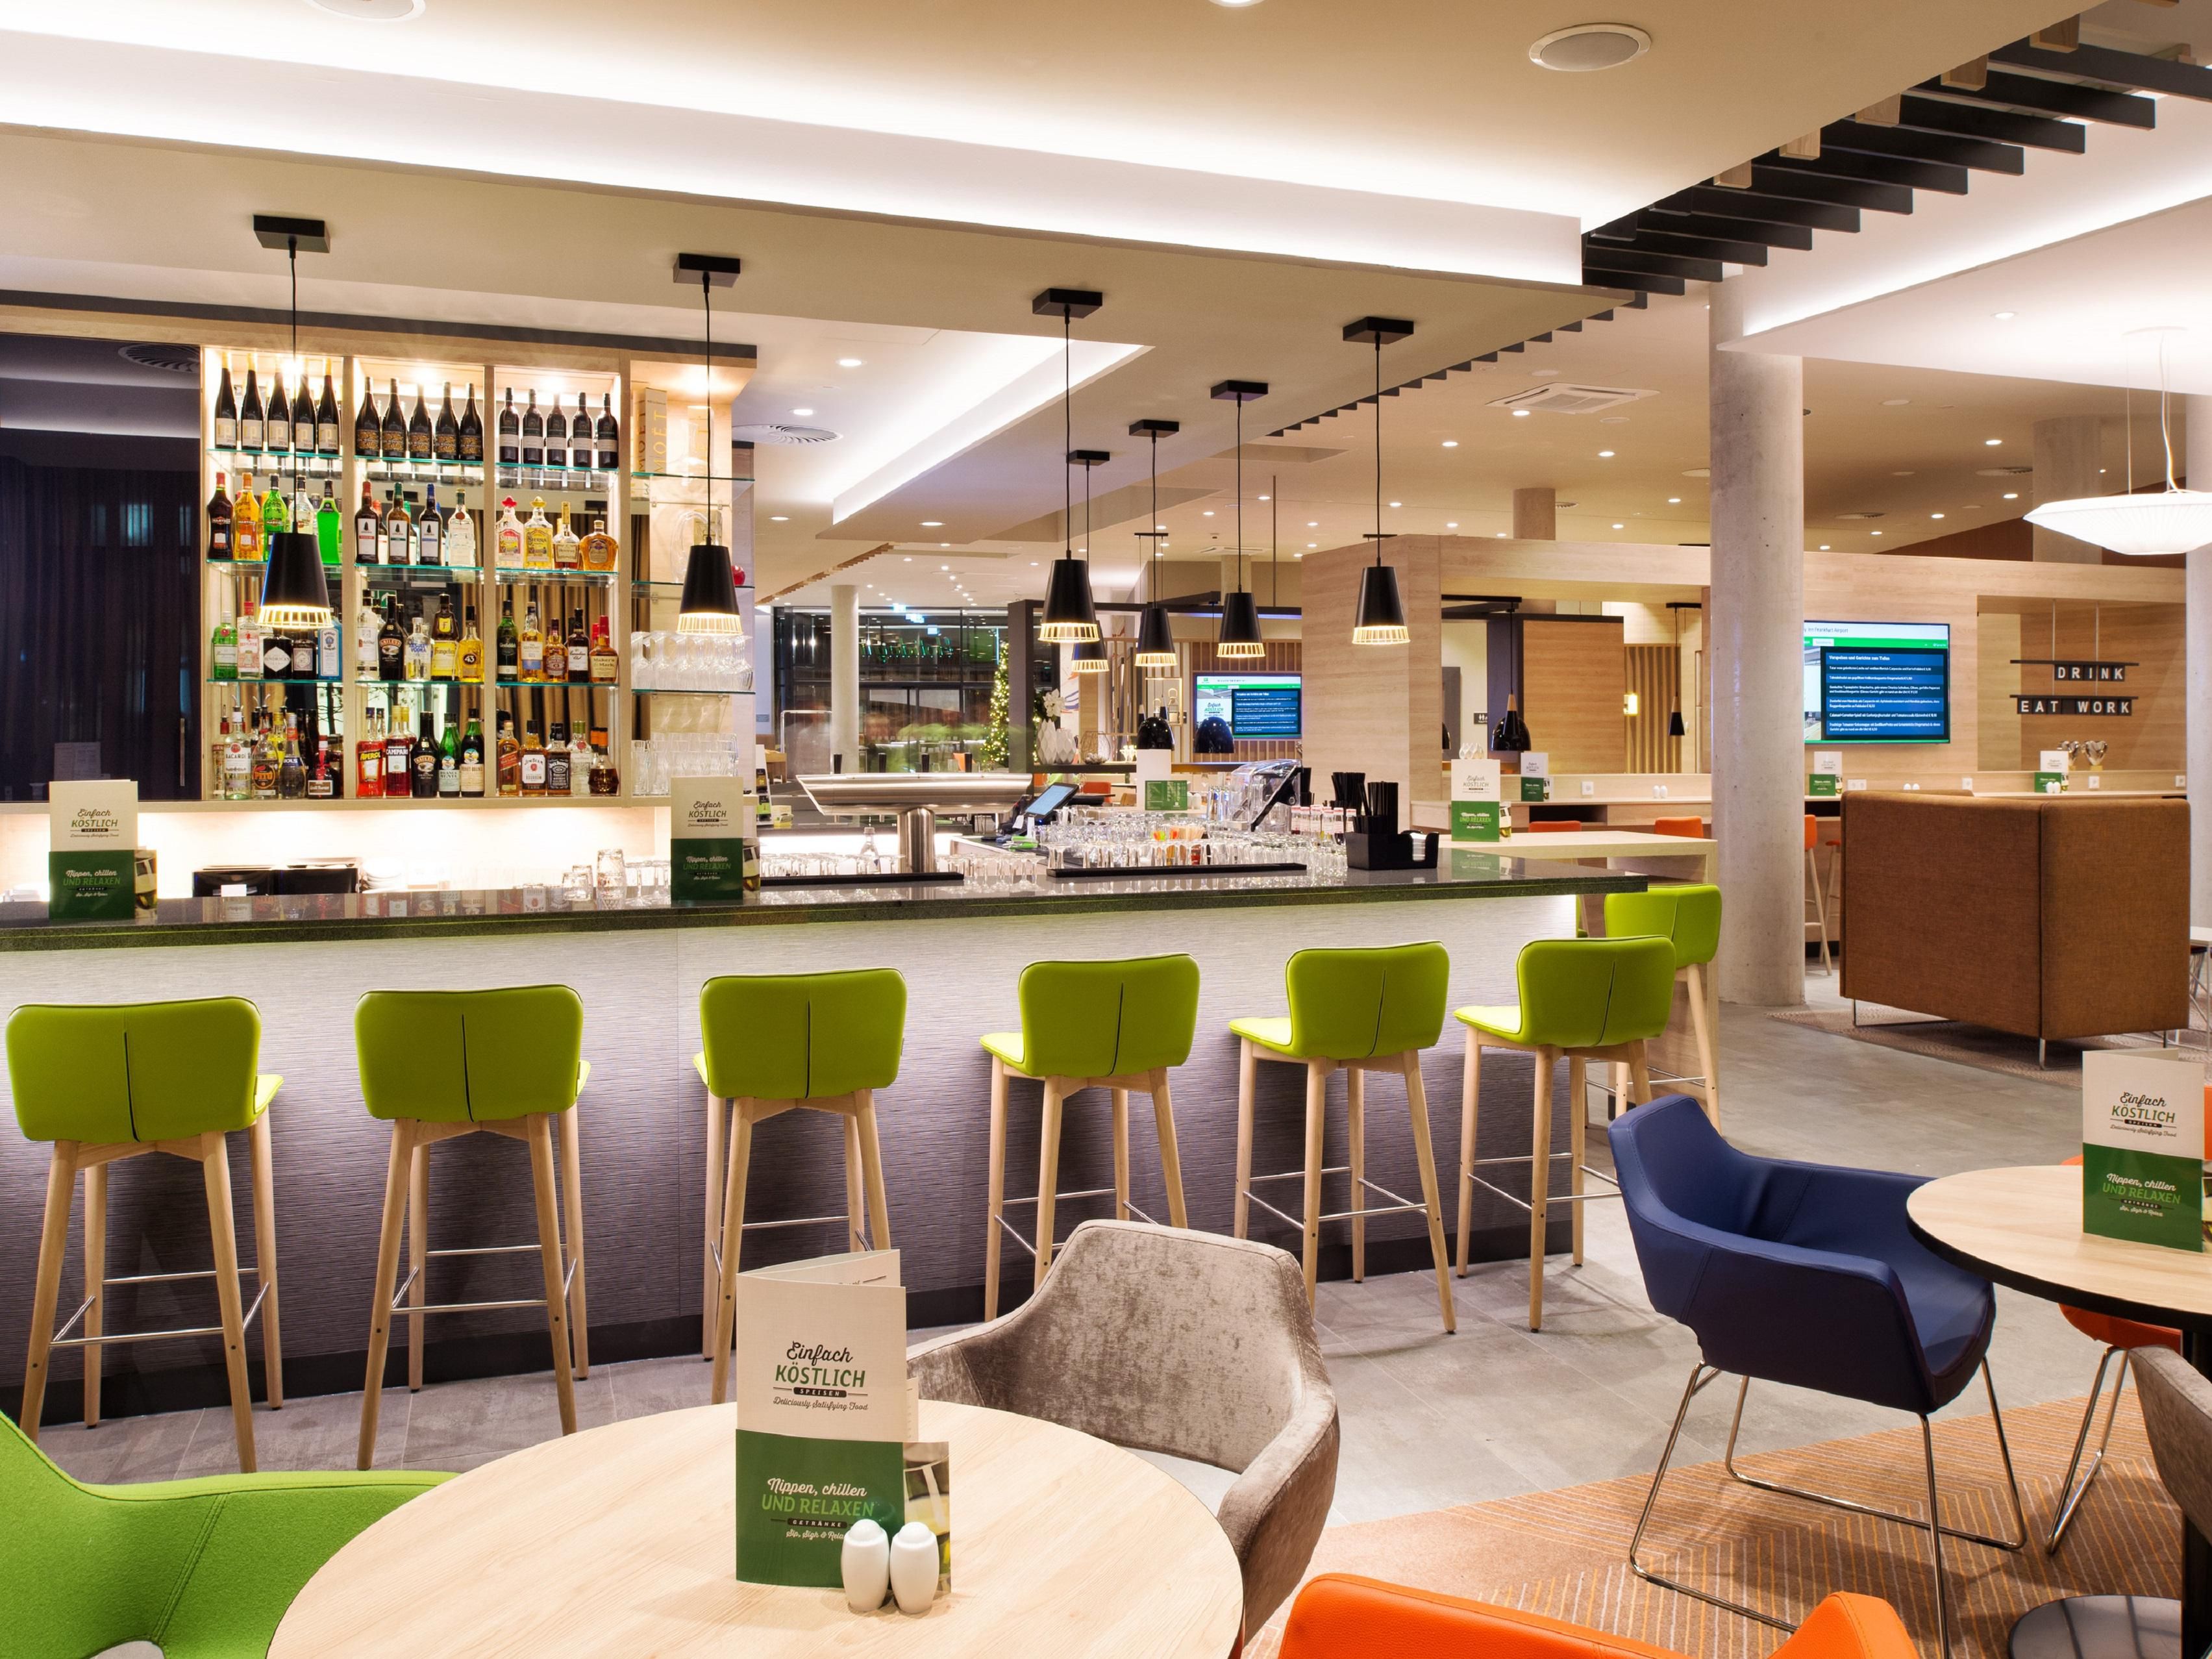 Relaxing after a busy day? Your flight was late? Come to our hotel bar, have a drink and relax!